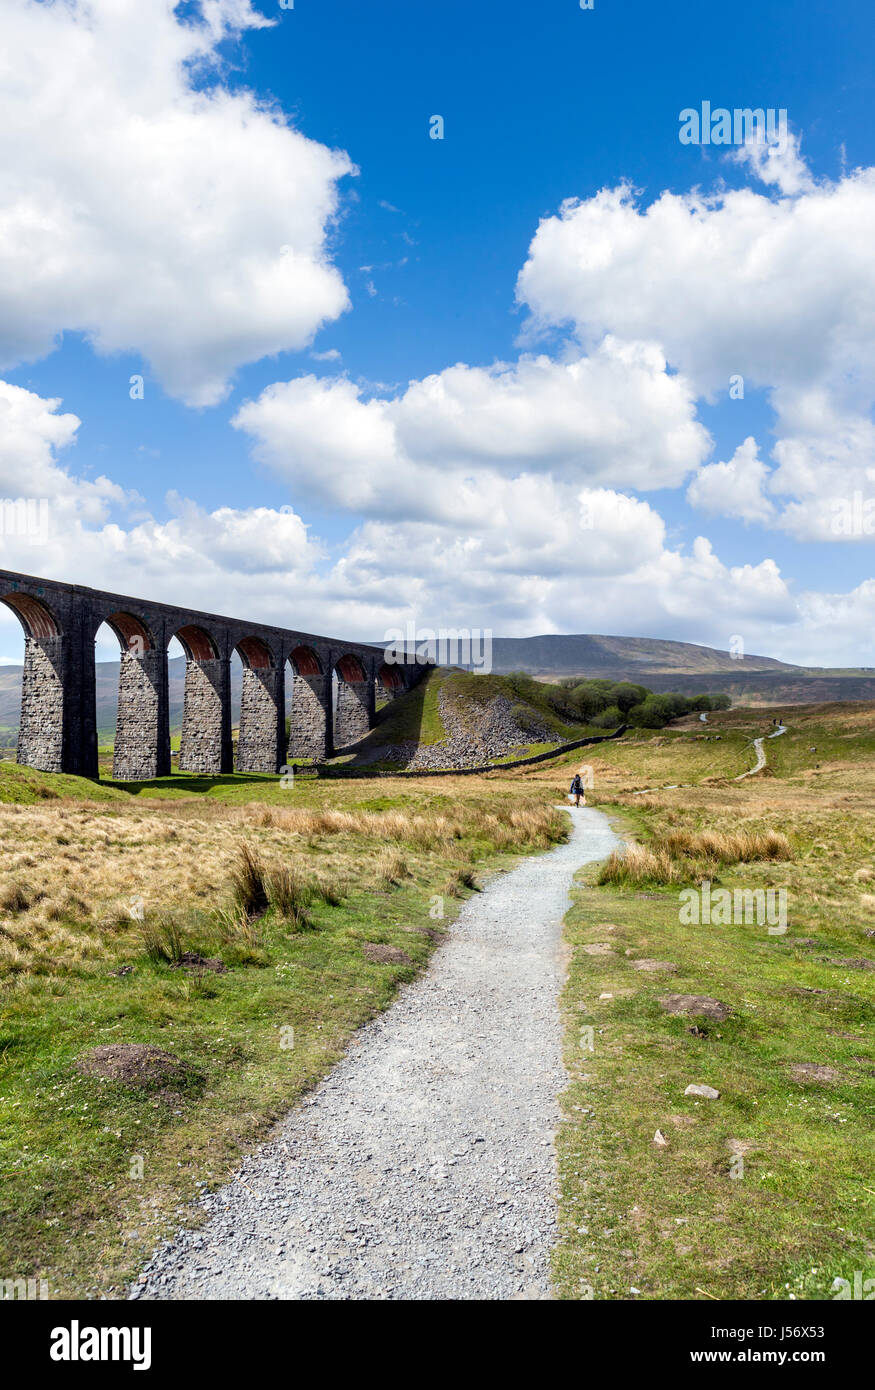 Walker on footpath by the Ribblehead Viaduct, Yorkshire Dales National Park, North Yorkshire, England, UK Stock Photo